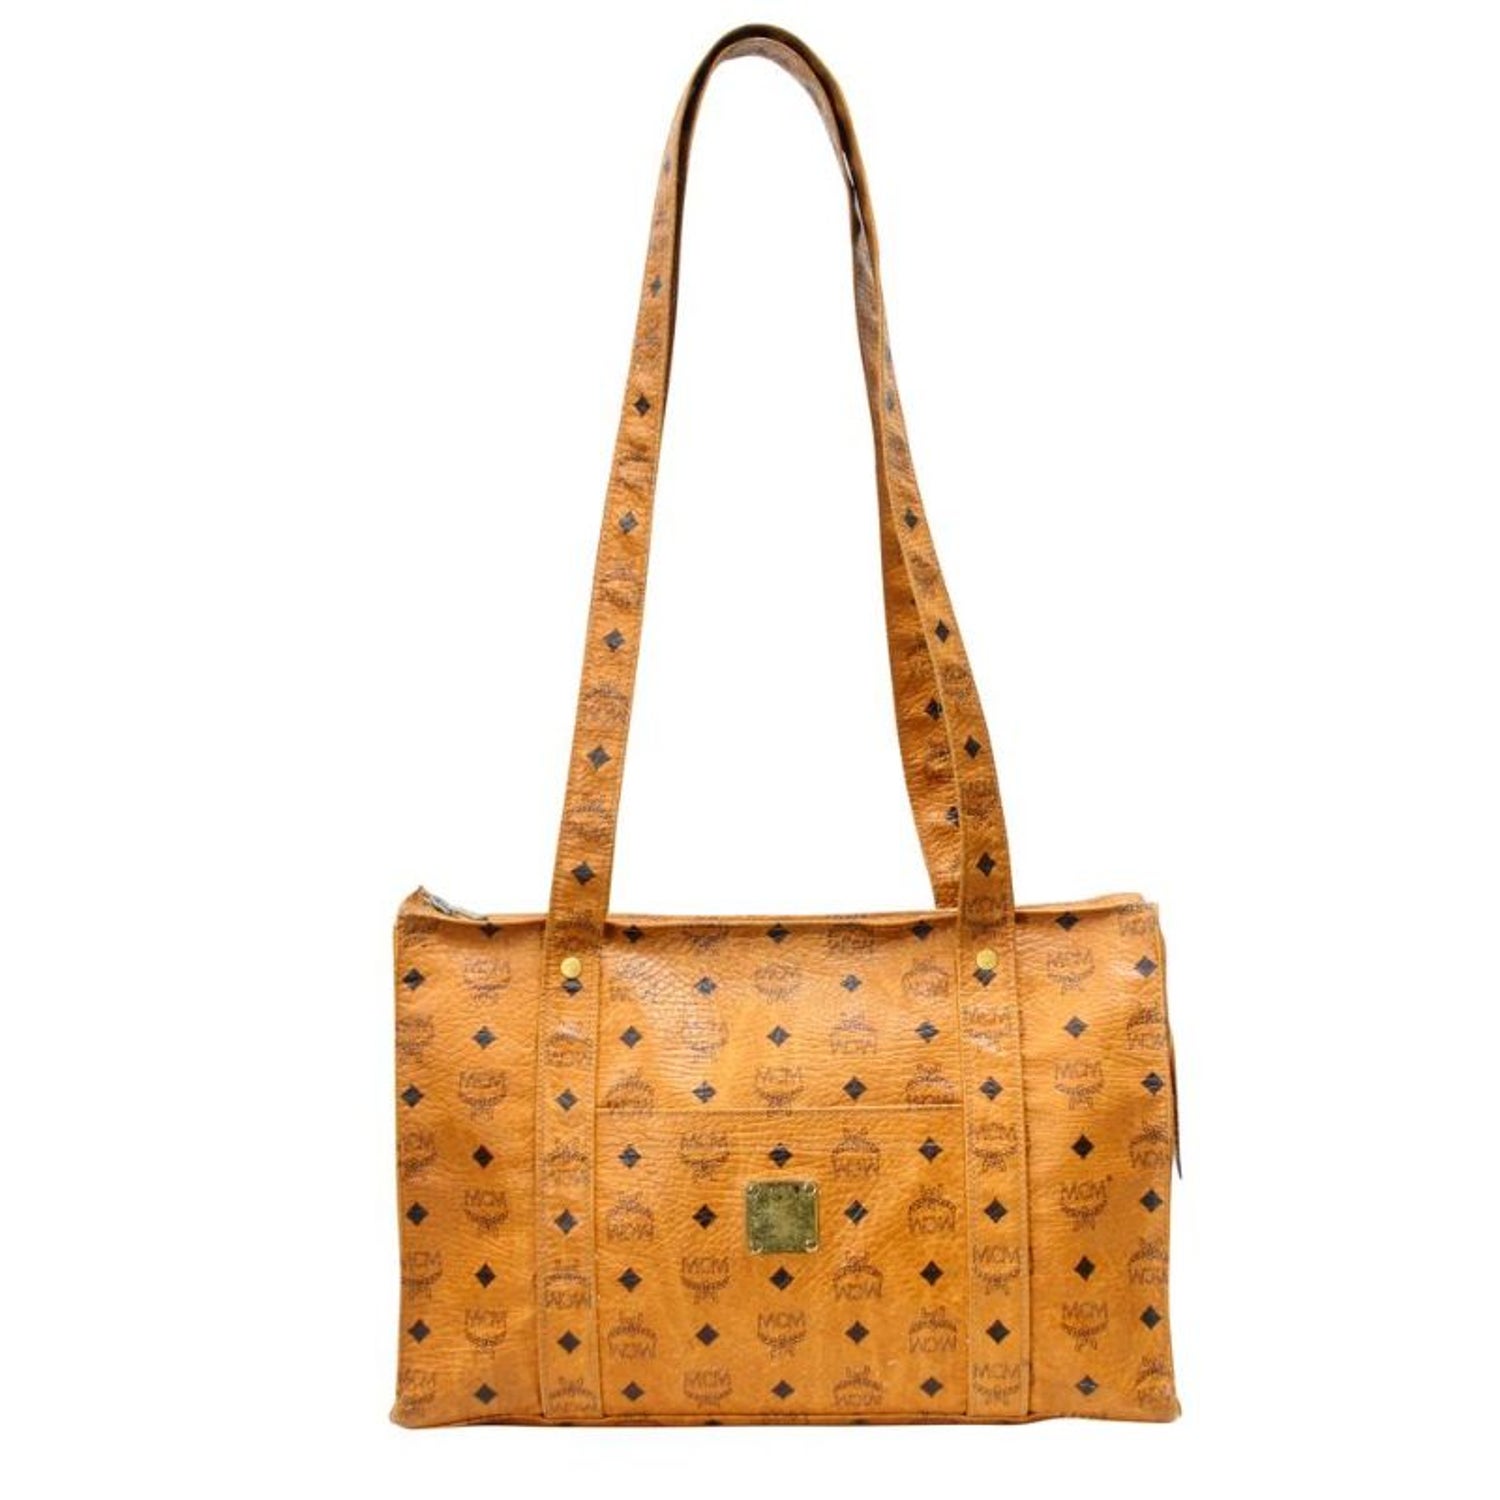 Mcm Print - 6 For Sale on 1stDibs | mcm brand meaning